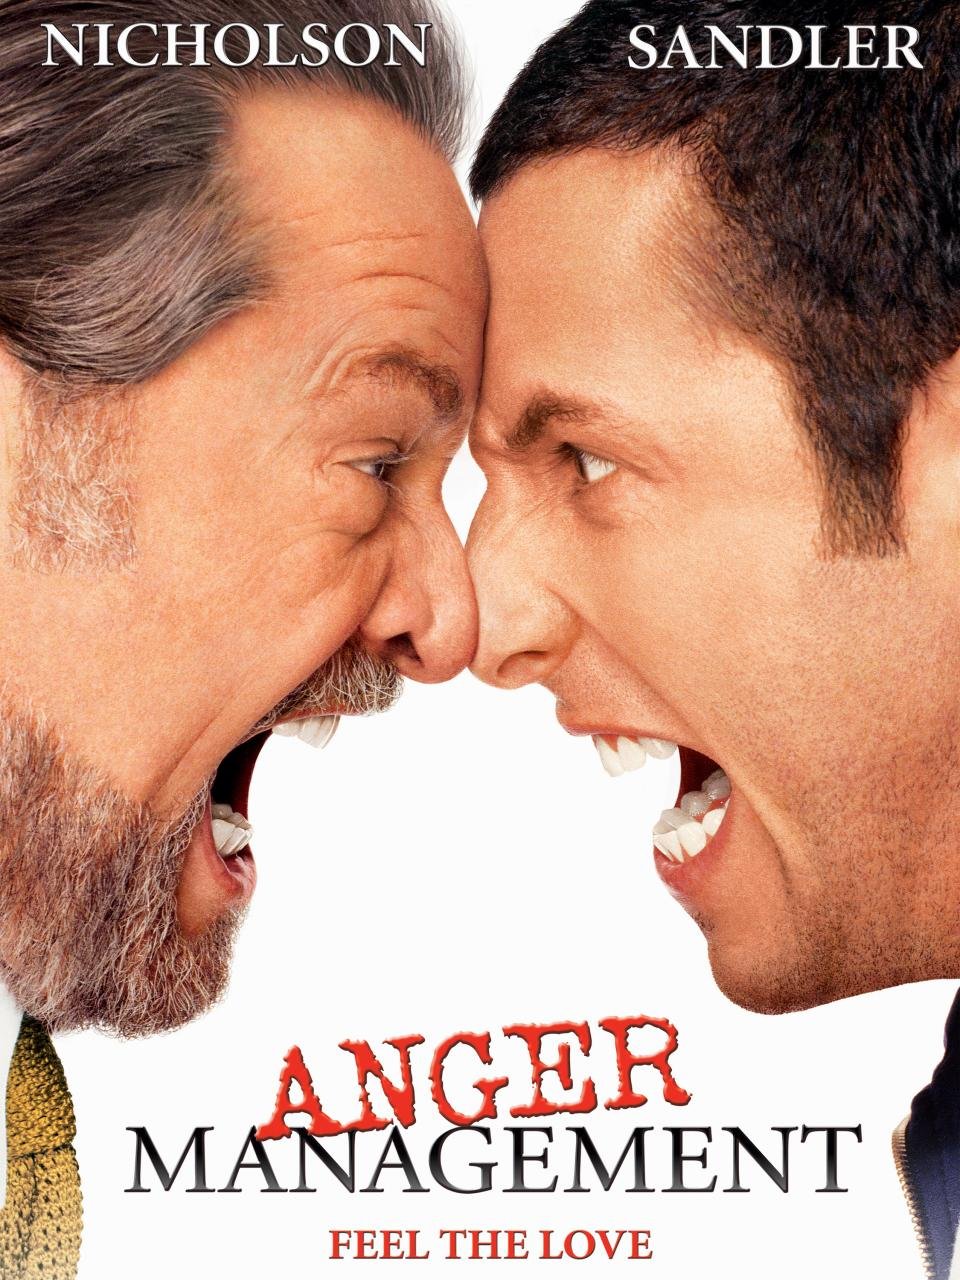 Poster of the movie Anger Management